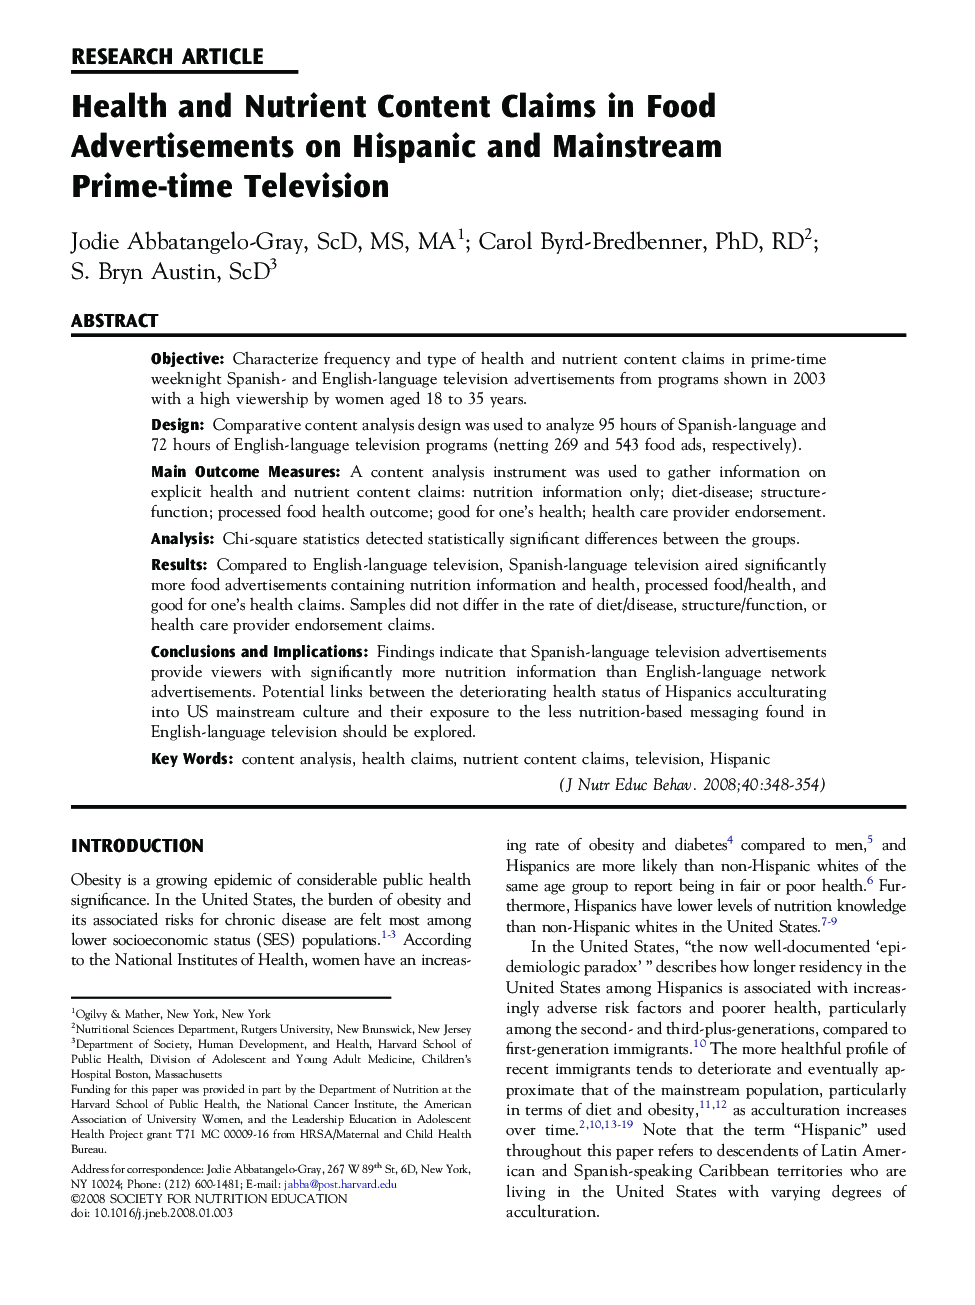 Health and Nutrient Content Claims in Food Advertisements on Hispanic and Mainstream Prime-time Television 